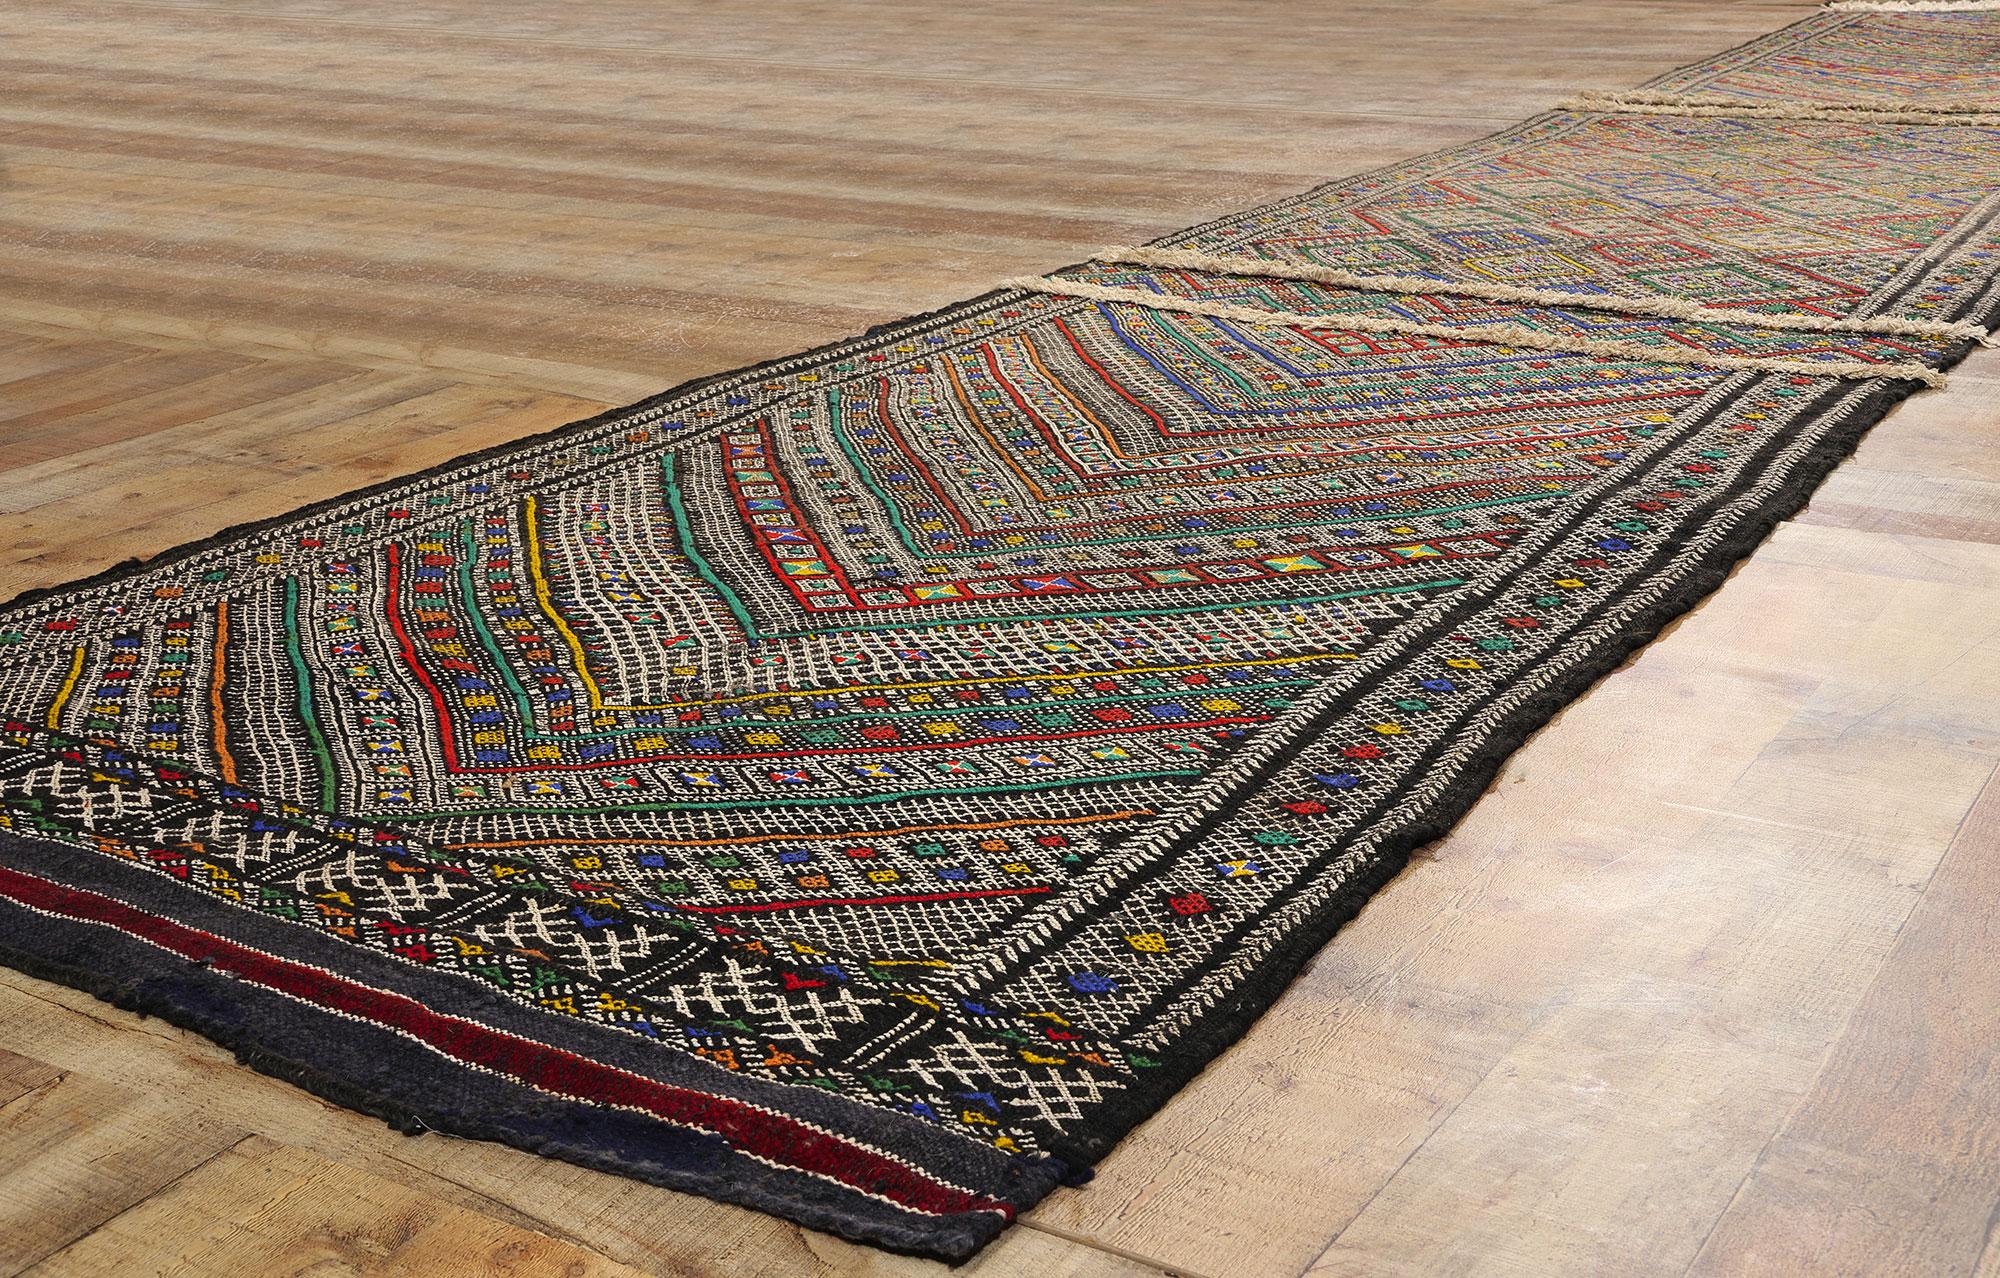 Hand-Woven Midcentury Bohemian Vintage Moroccan Zemmour Kilim Berber Rug, 03'09 x 20'01 For Sale